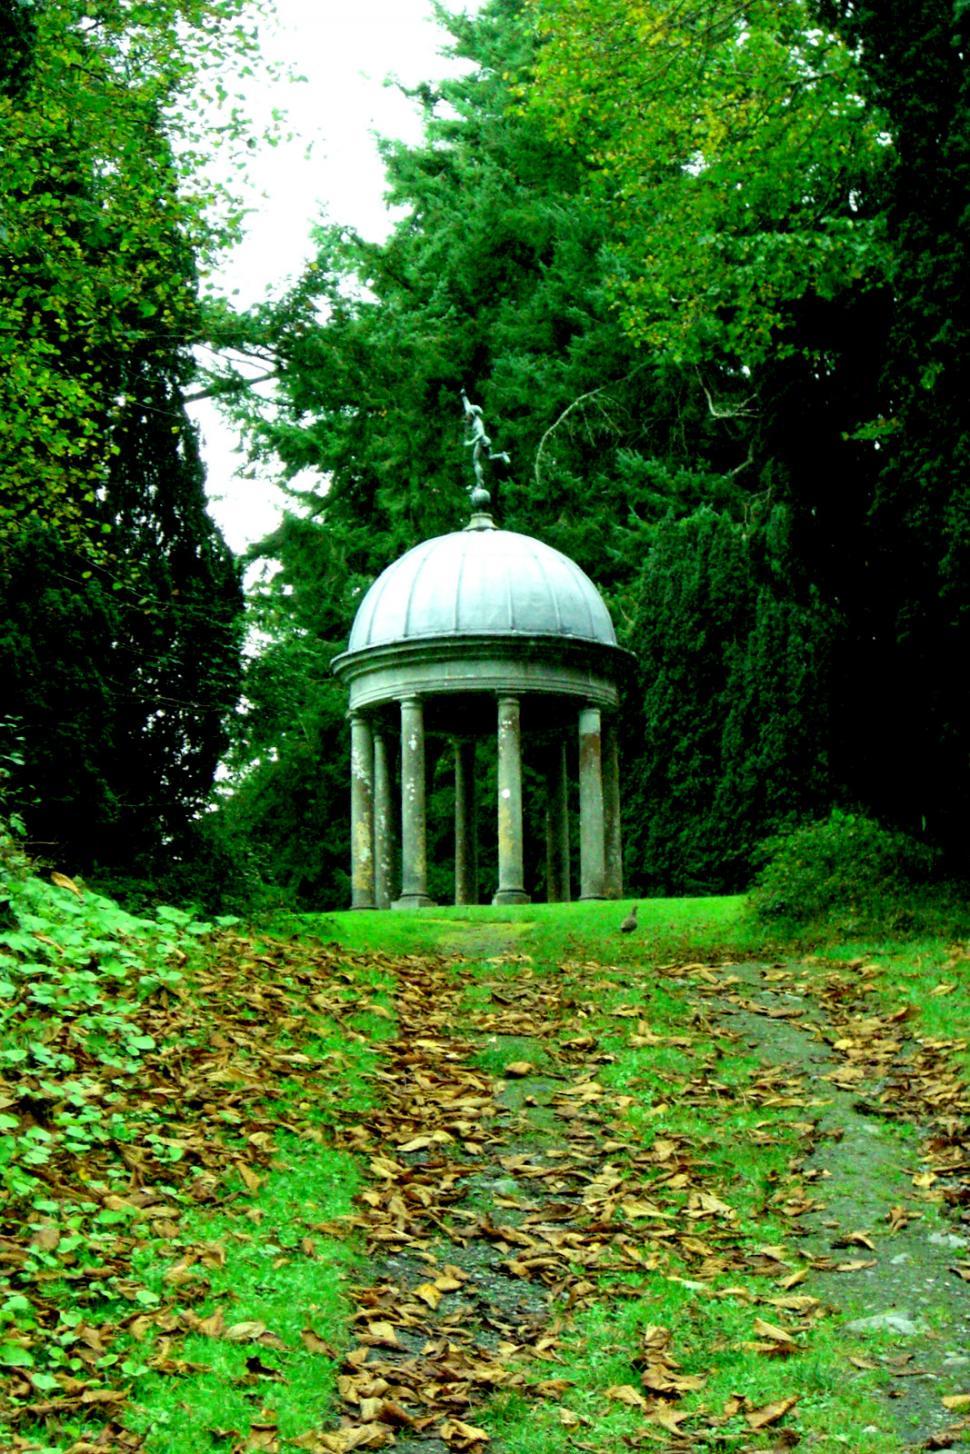 Free Image of Gazebo in the Middle of a Park Surrounded by Trees 